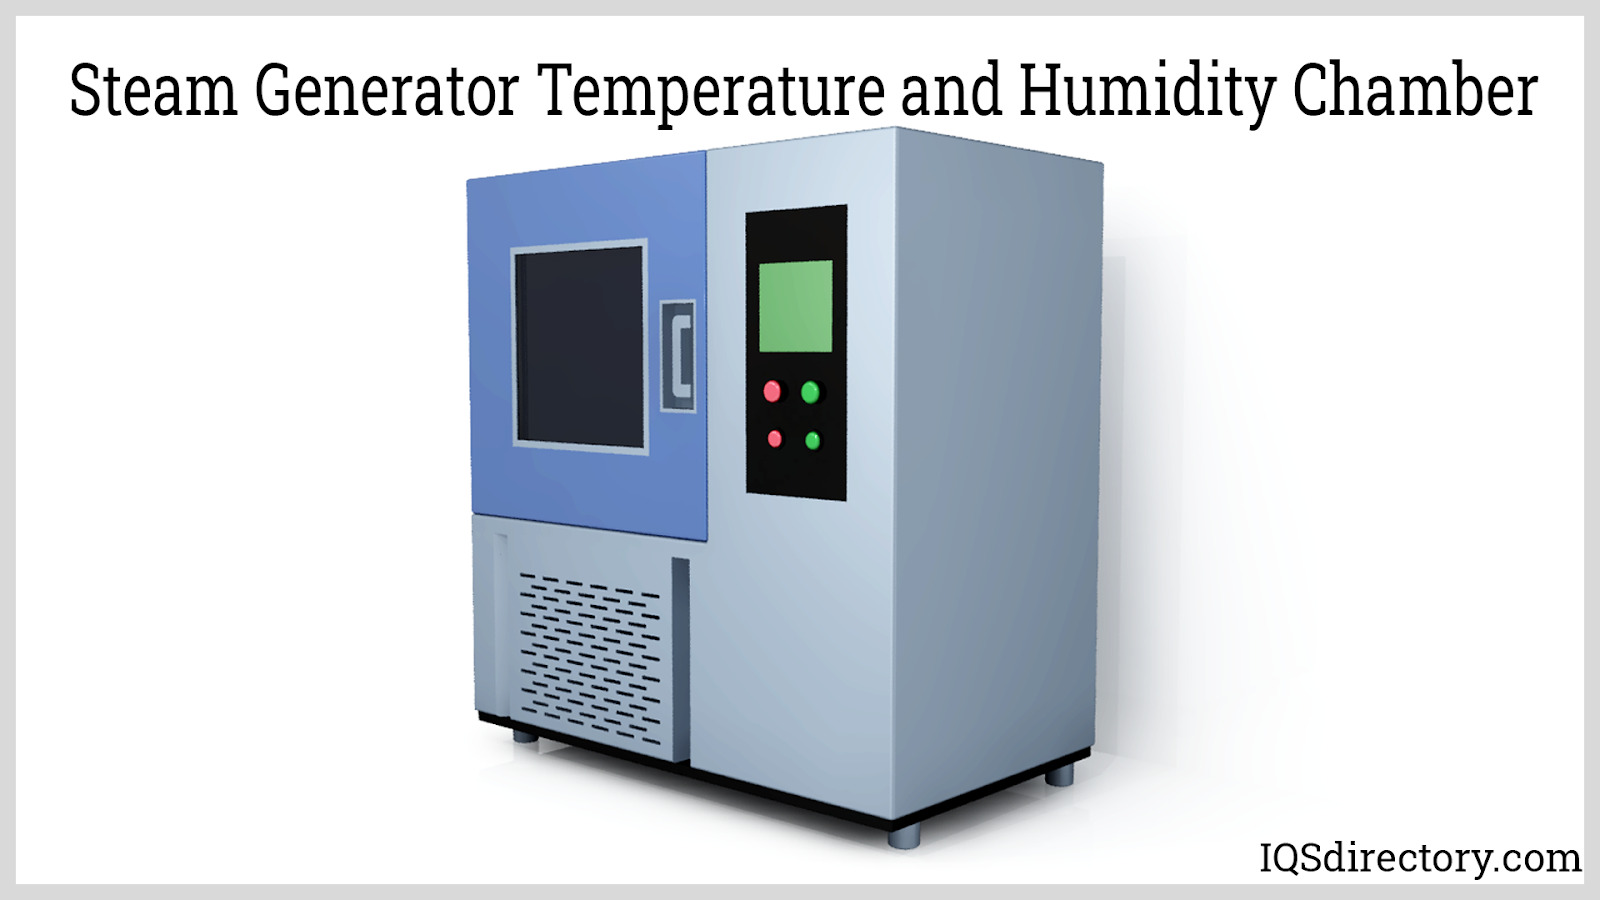 Steam Generator Temperature and Humidity Chamber